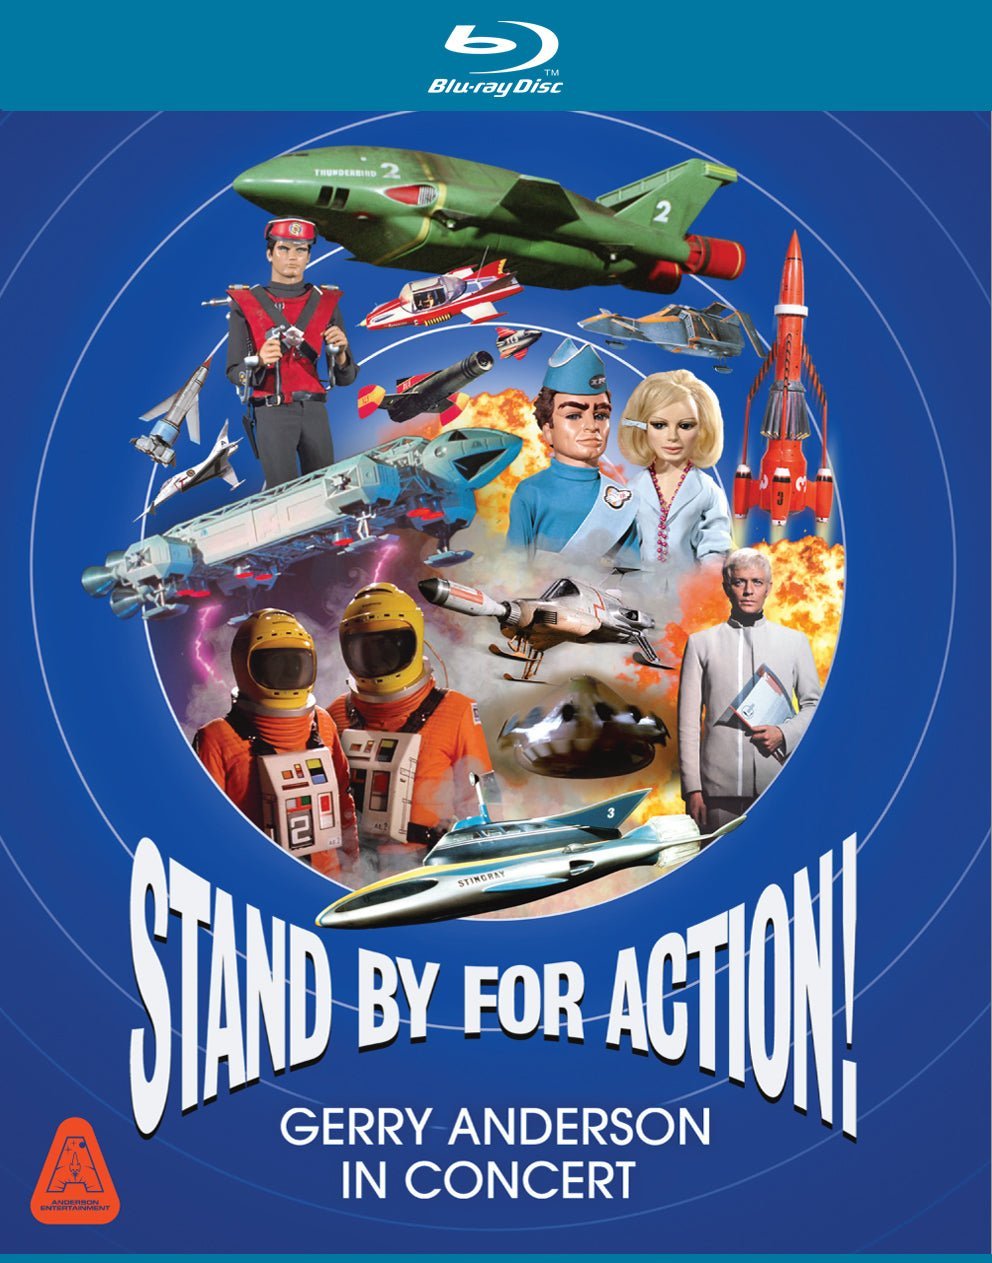 Stand by for Action Blu-ray and CD Bundle - The Gerry Anderson Store